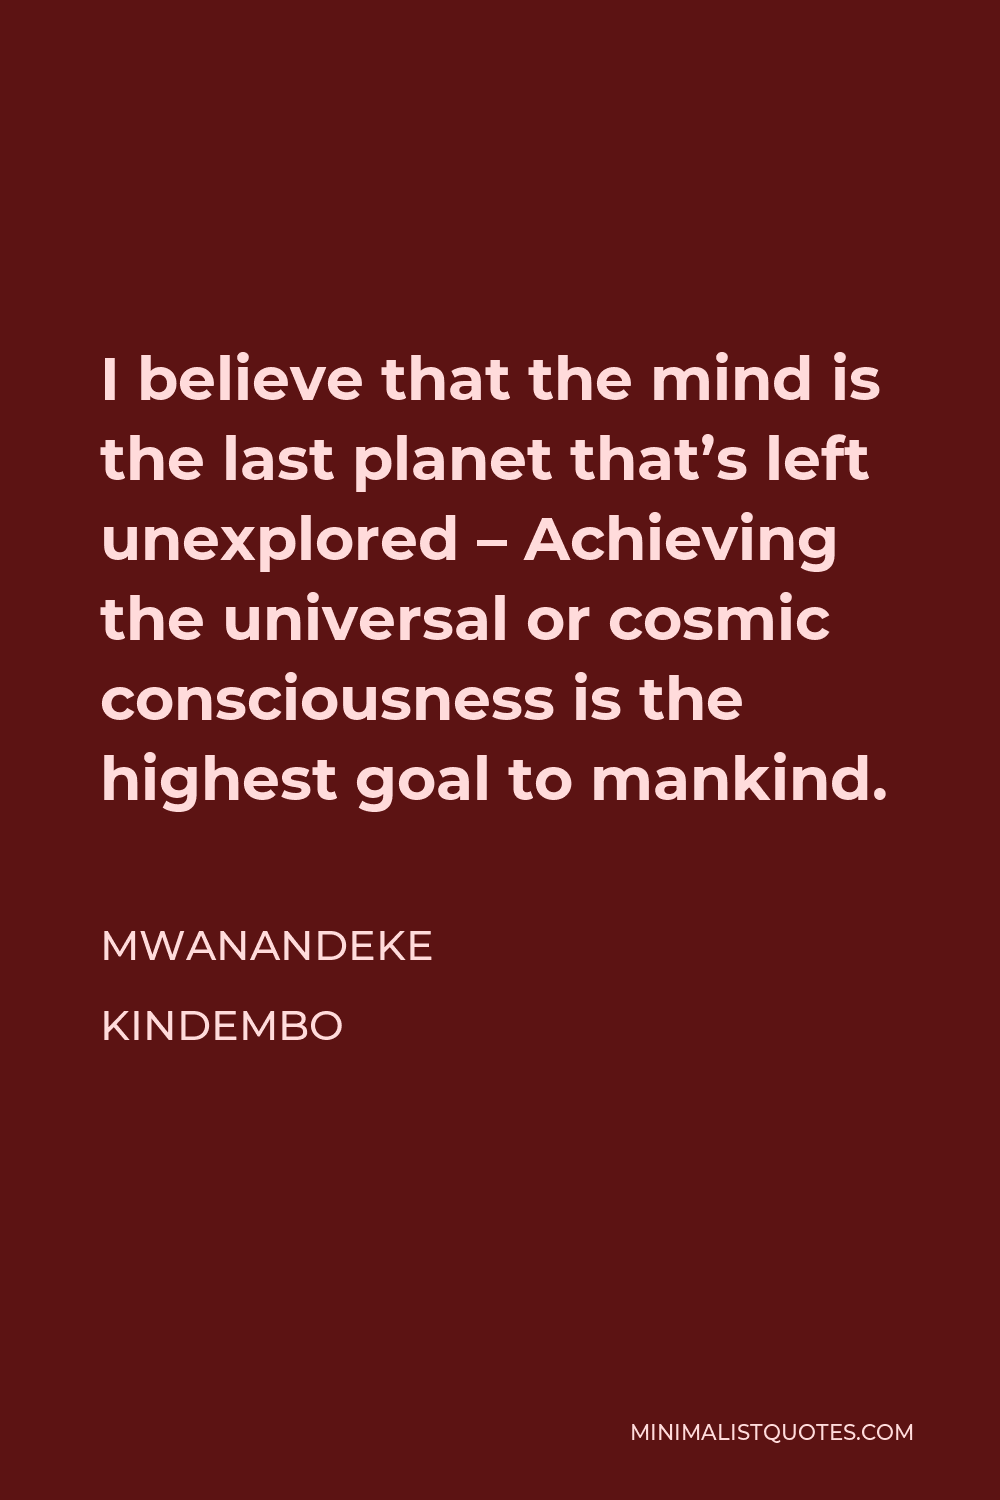 Mwanandeke Kindembo Quote - I believe that the mind is the last planet that’s left unexplored – Achieving the universal or cosmic consciousness is the highest goal to mankind.